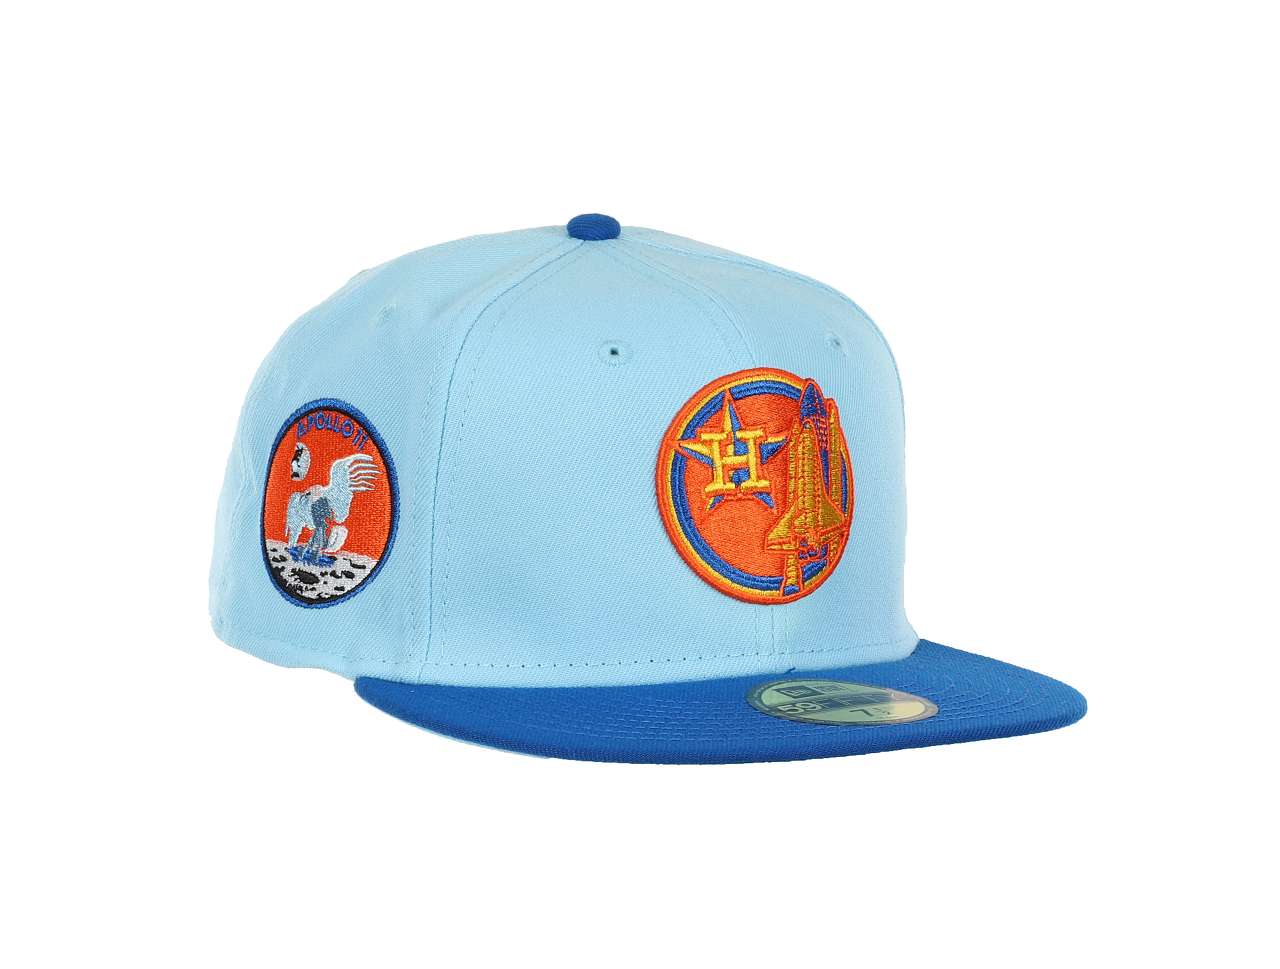 Houston Astros MLB Cooperstown Apollo 11 Sidepatch Blue Azure 59Fifty Basecap New Era